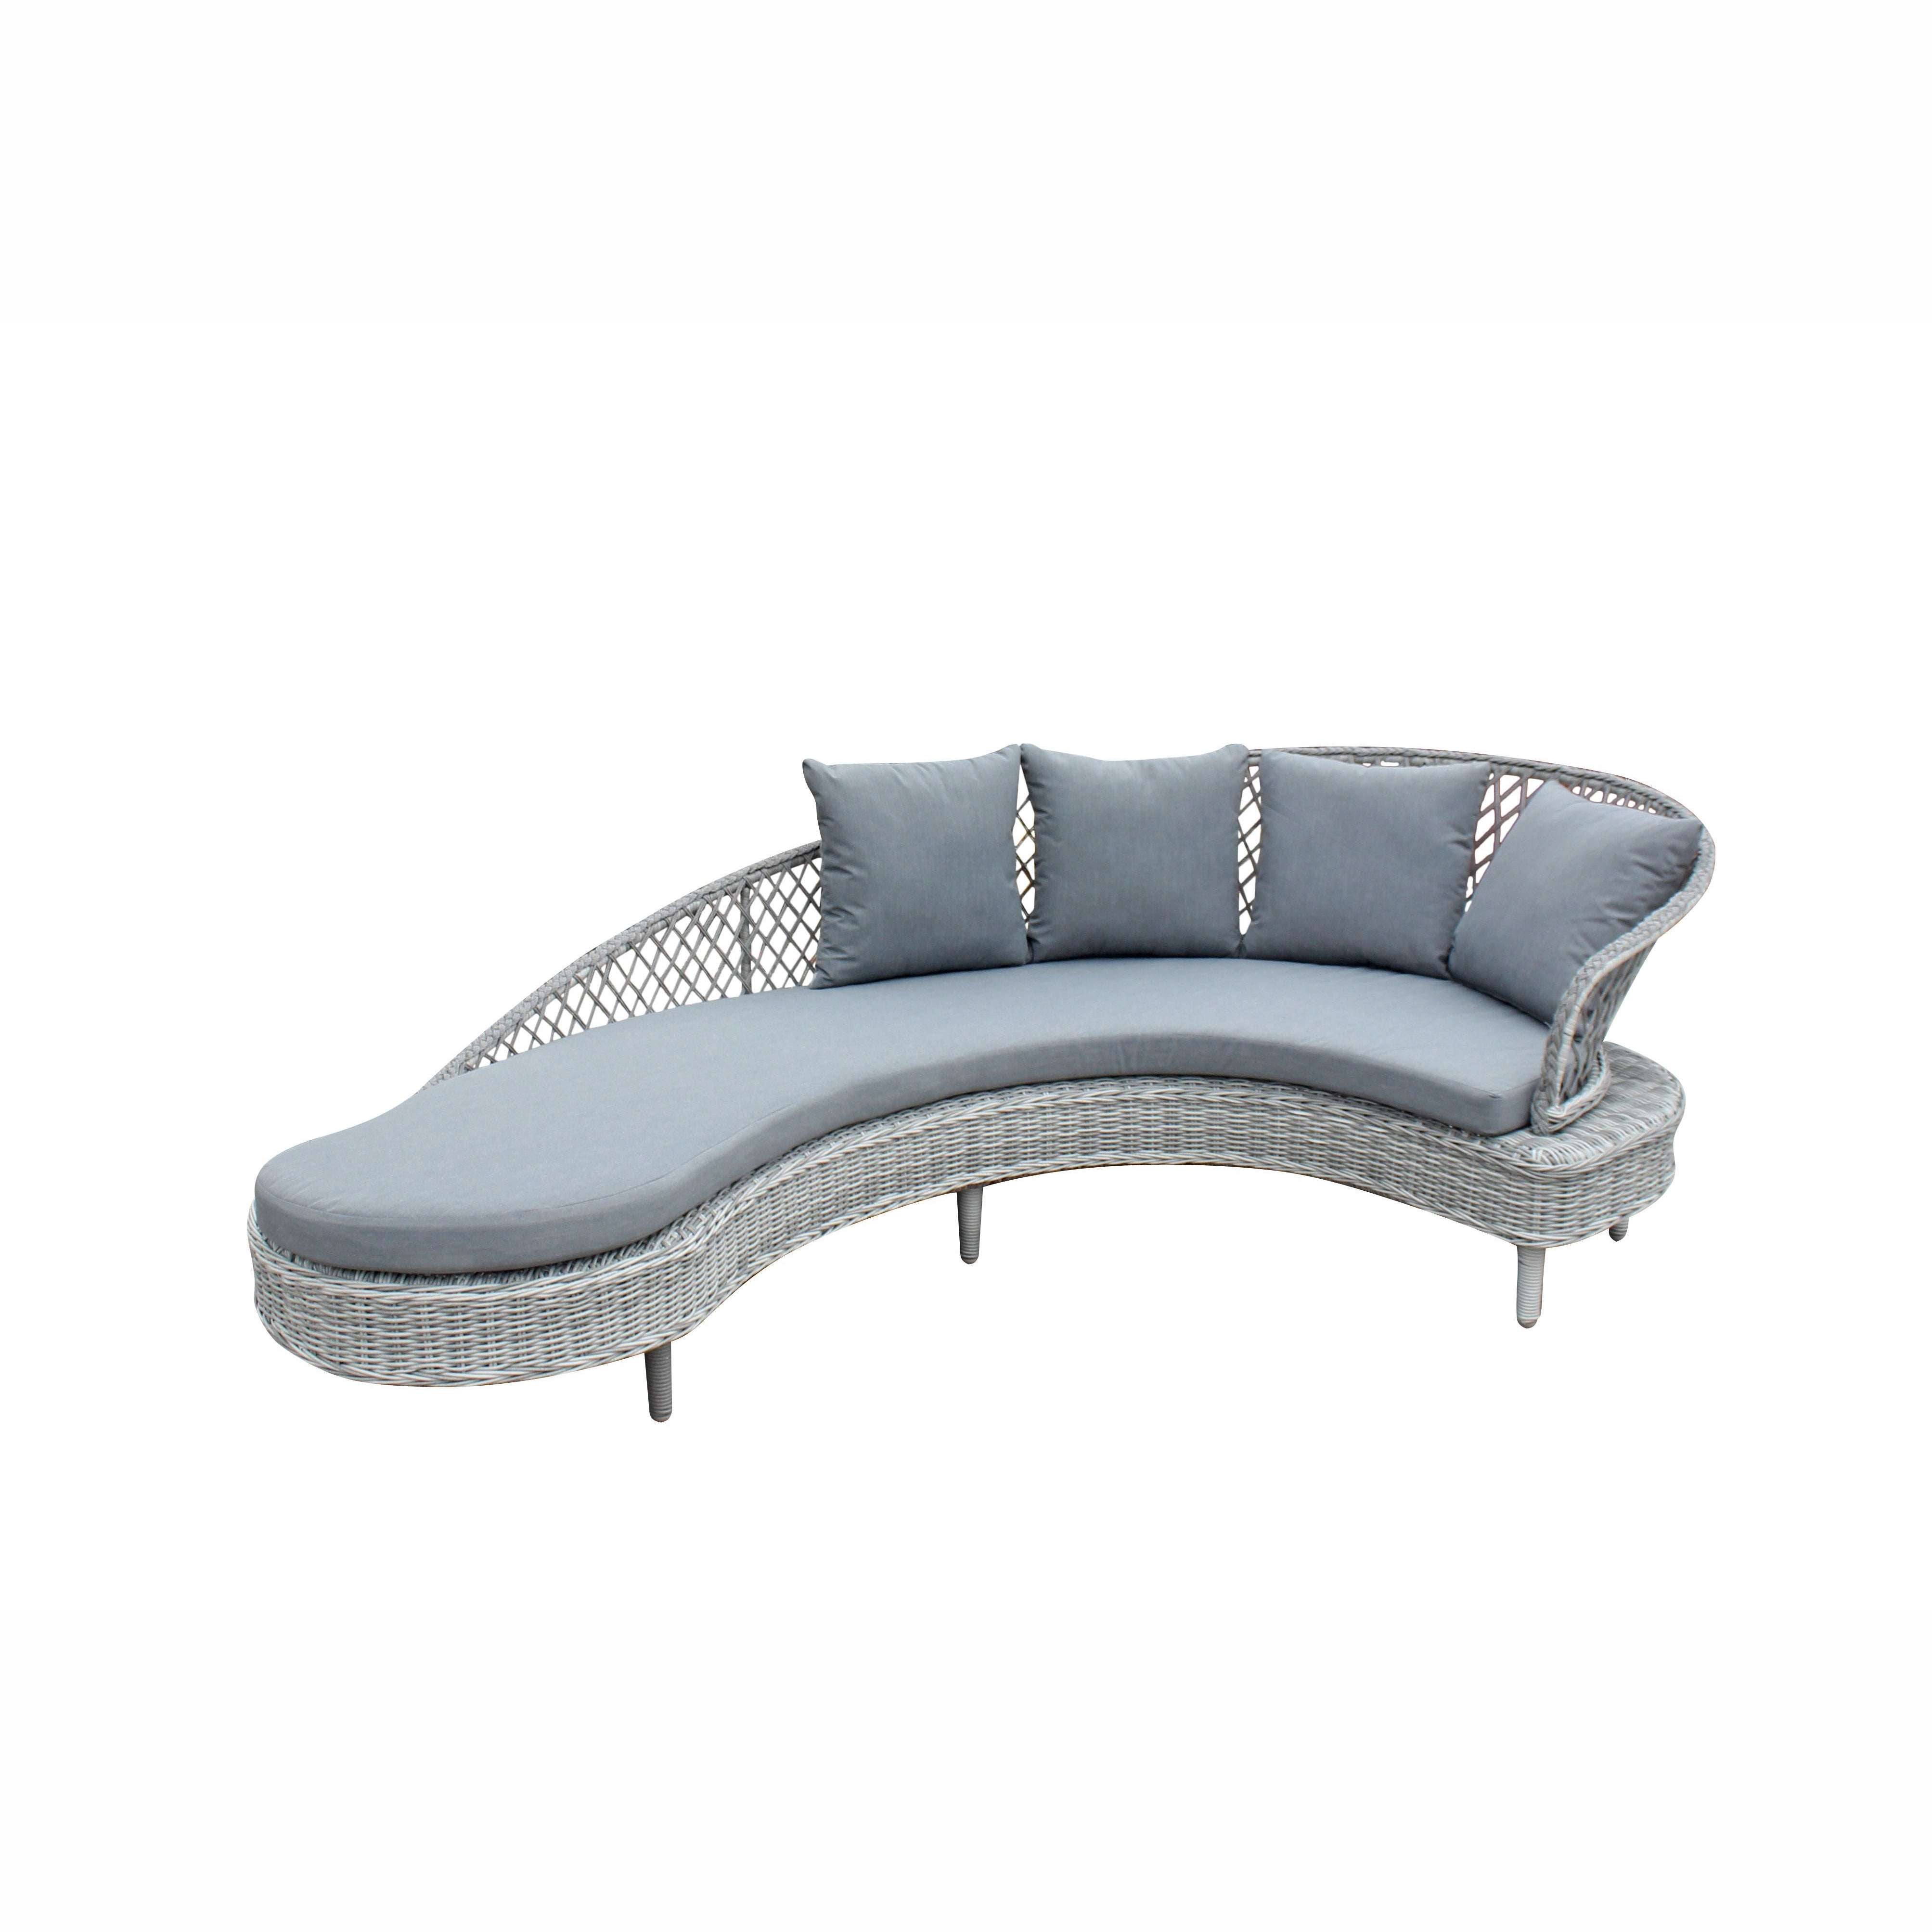 Exceptional Garden:Signature Weave Serenity Sofa Collection in Grey